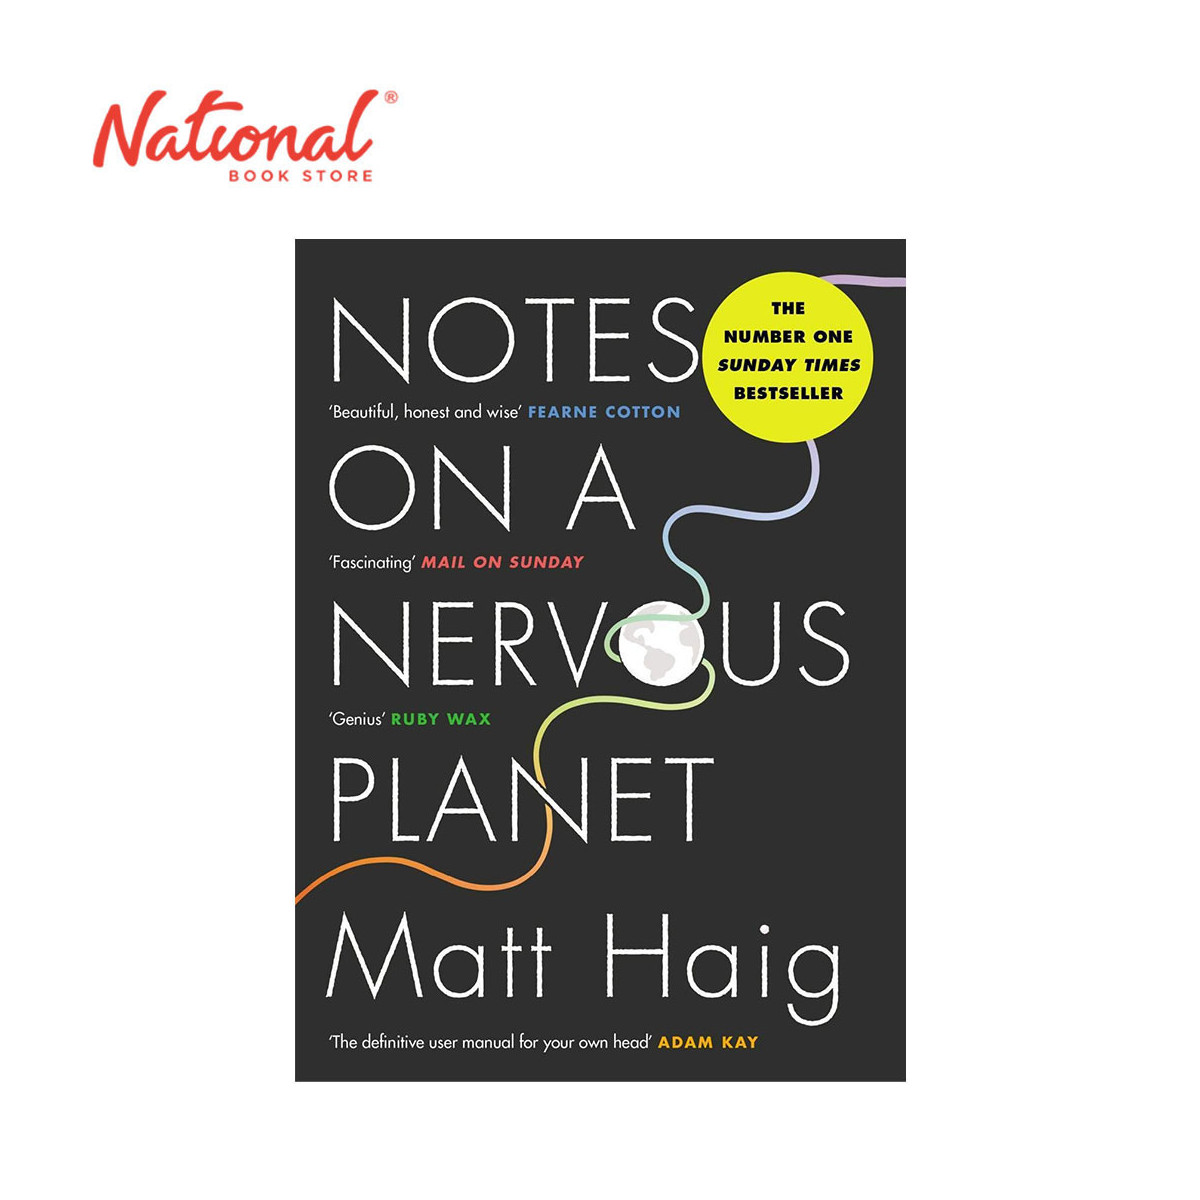 Notes On A Nervous Planet by Matt Haig - Trade Paperback - Critique & Literary Essays